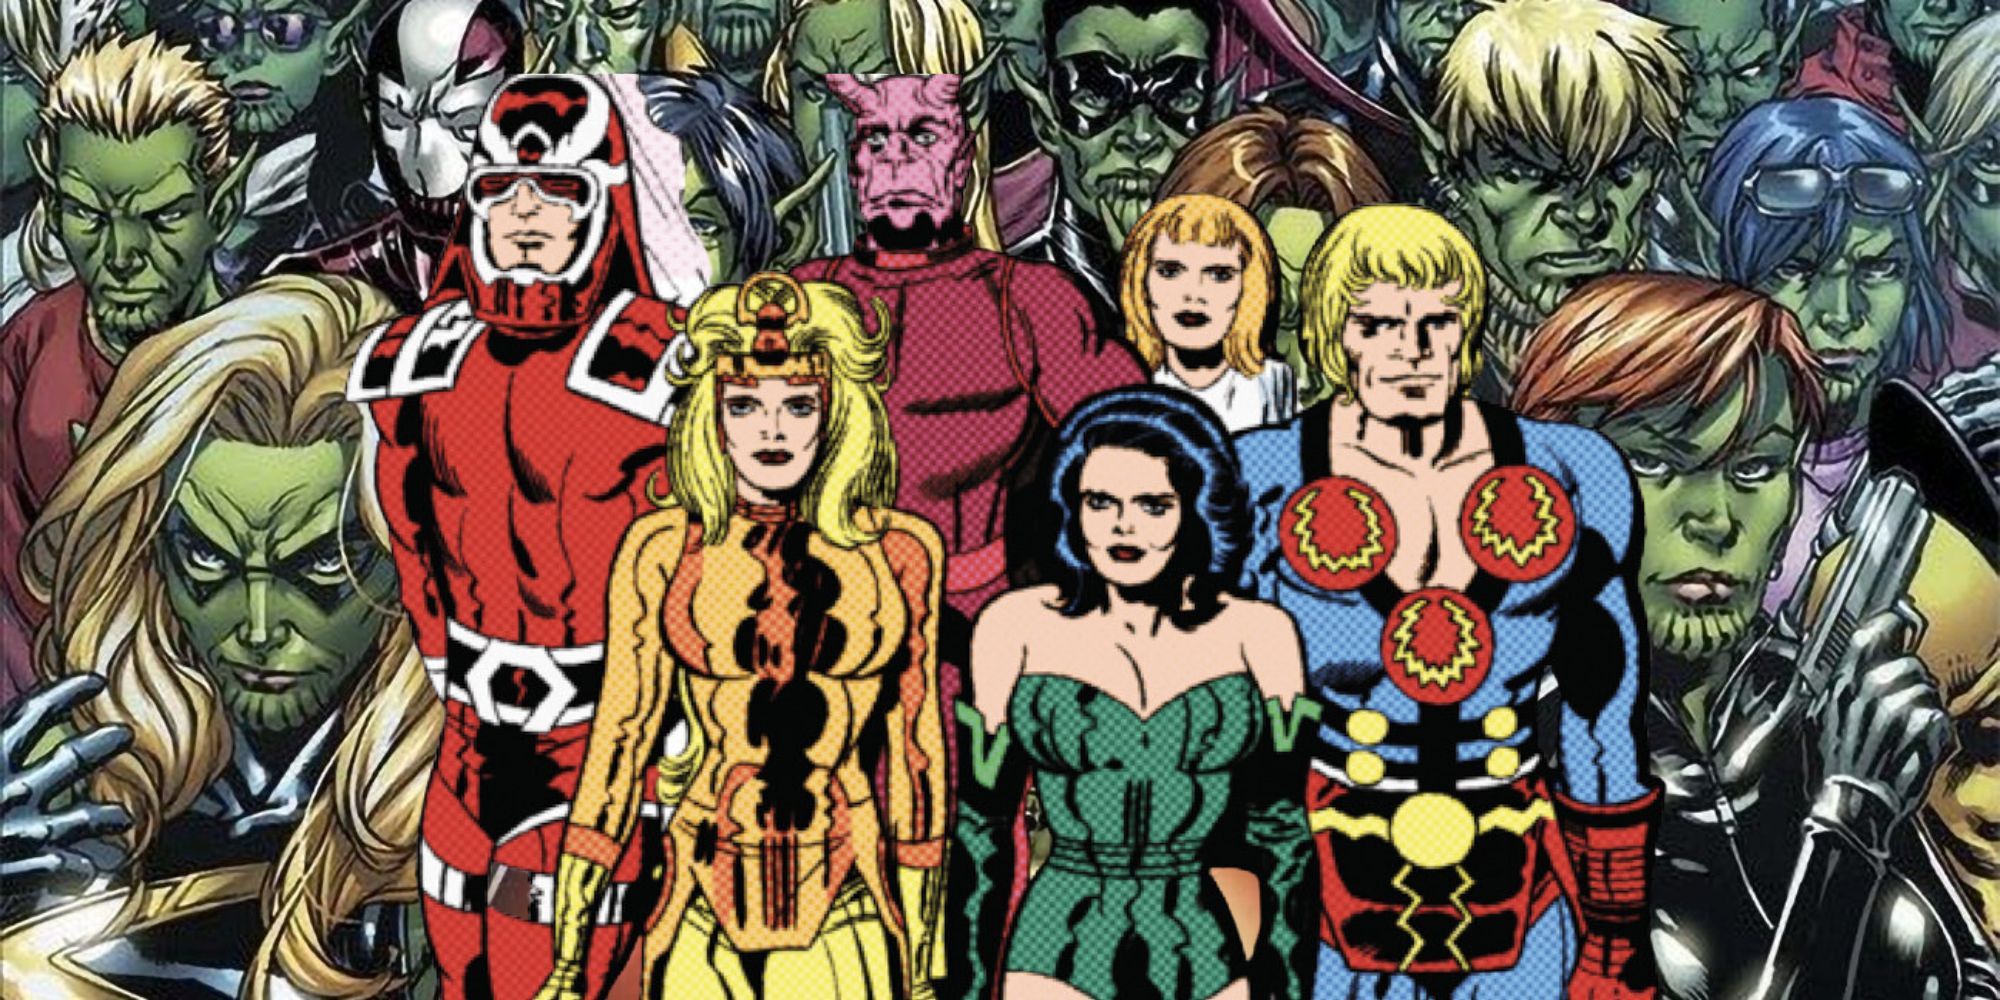 An image collage of Marvel's Eternals in the forefront and an army of Marvel Skrulls behind them